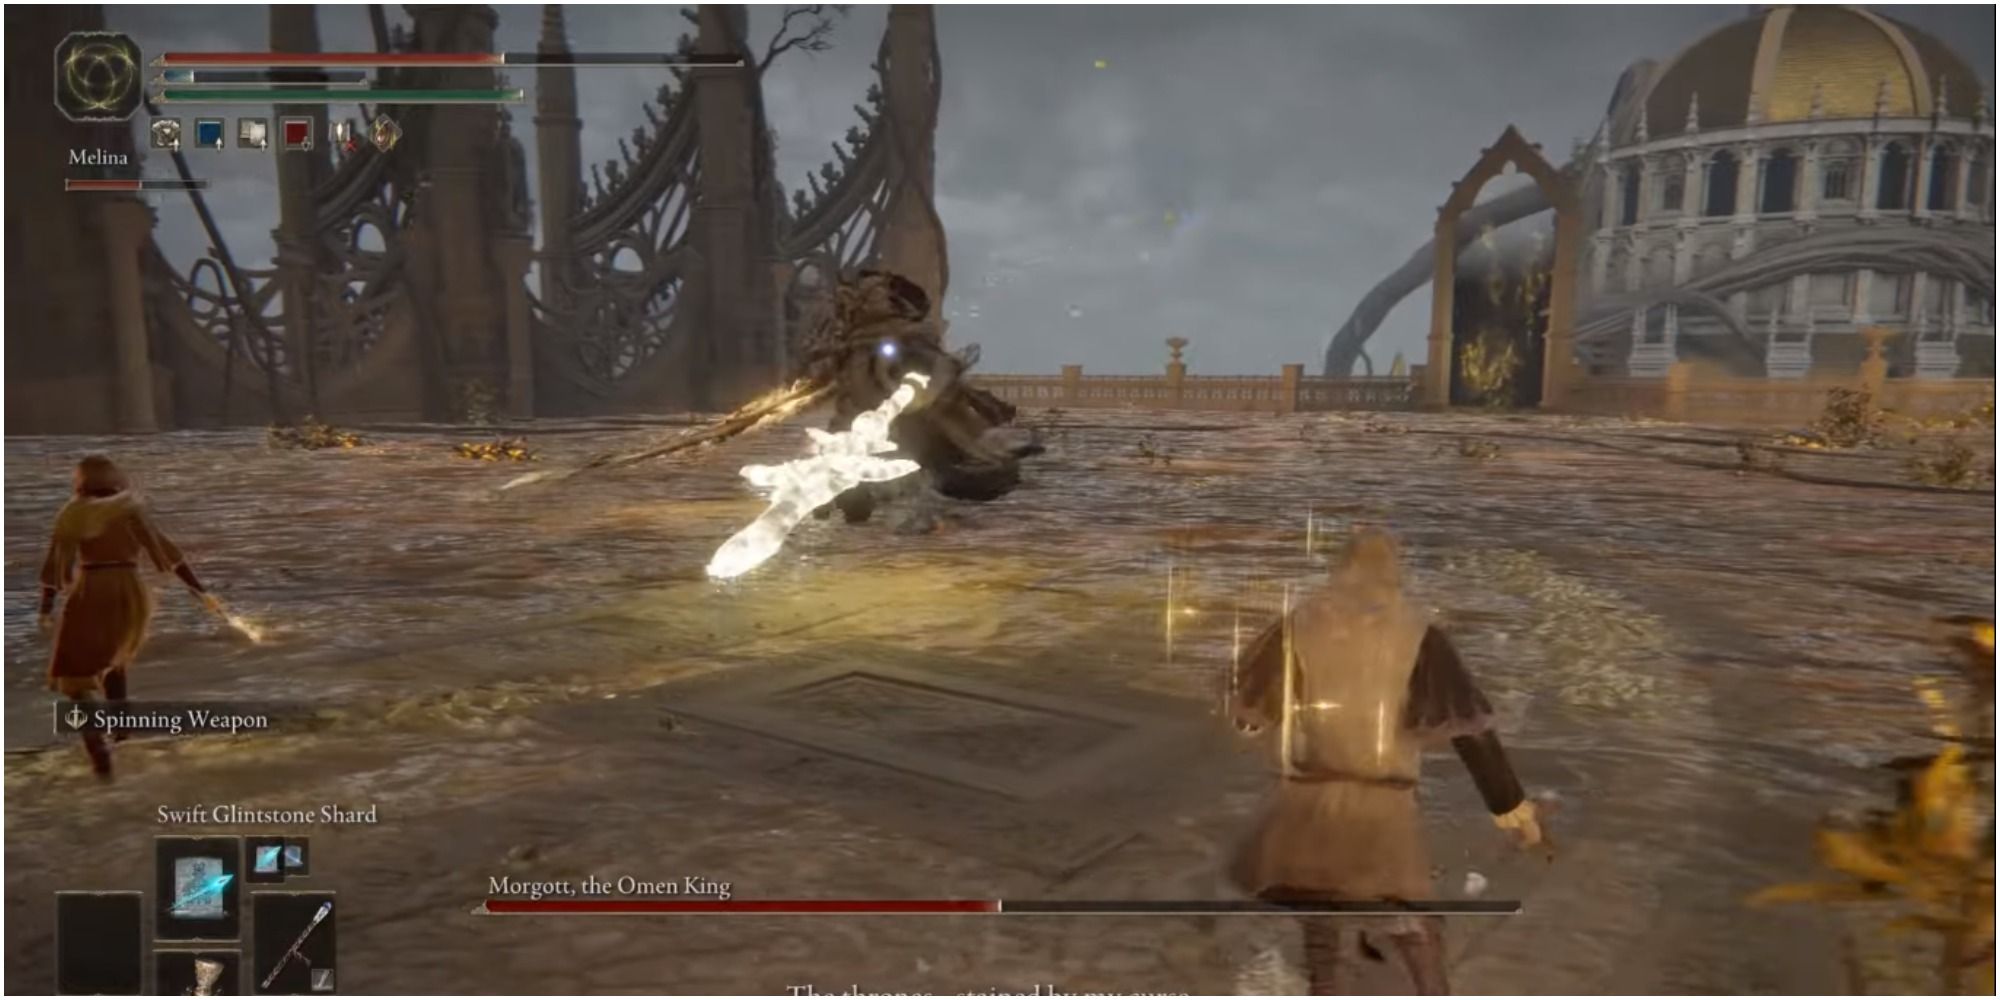 The boss charging at the player with a holy spear.